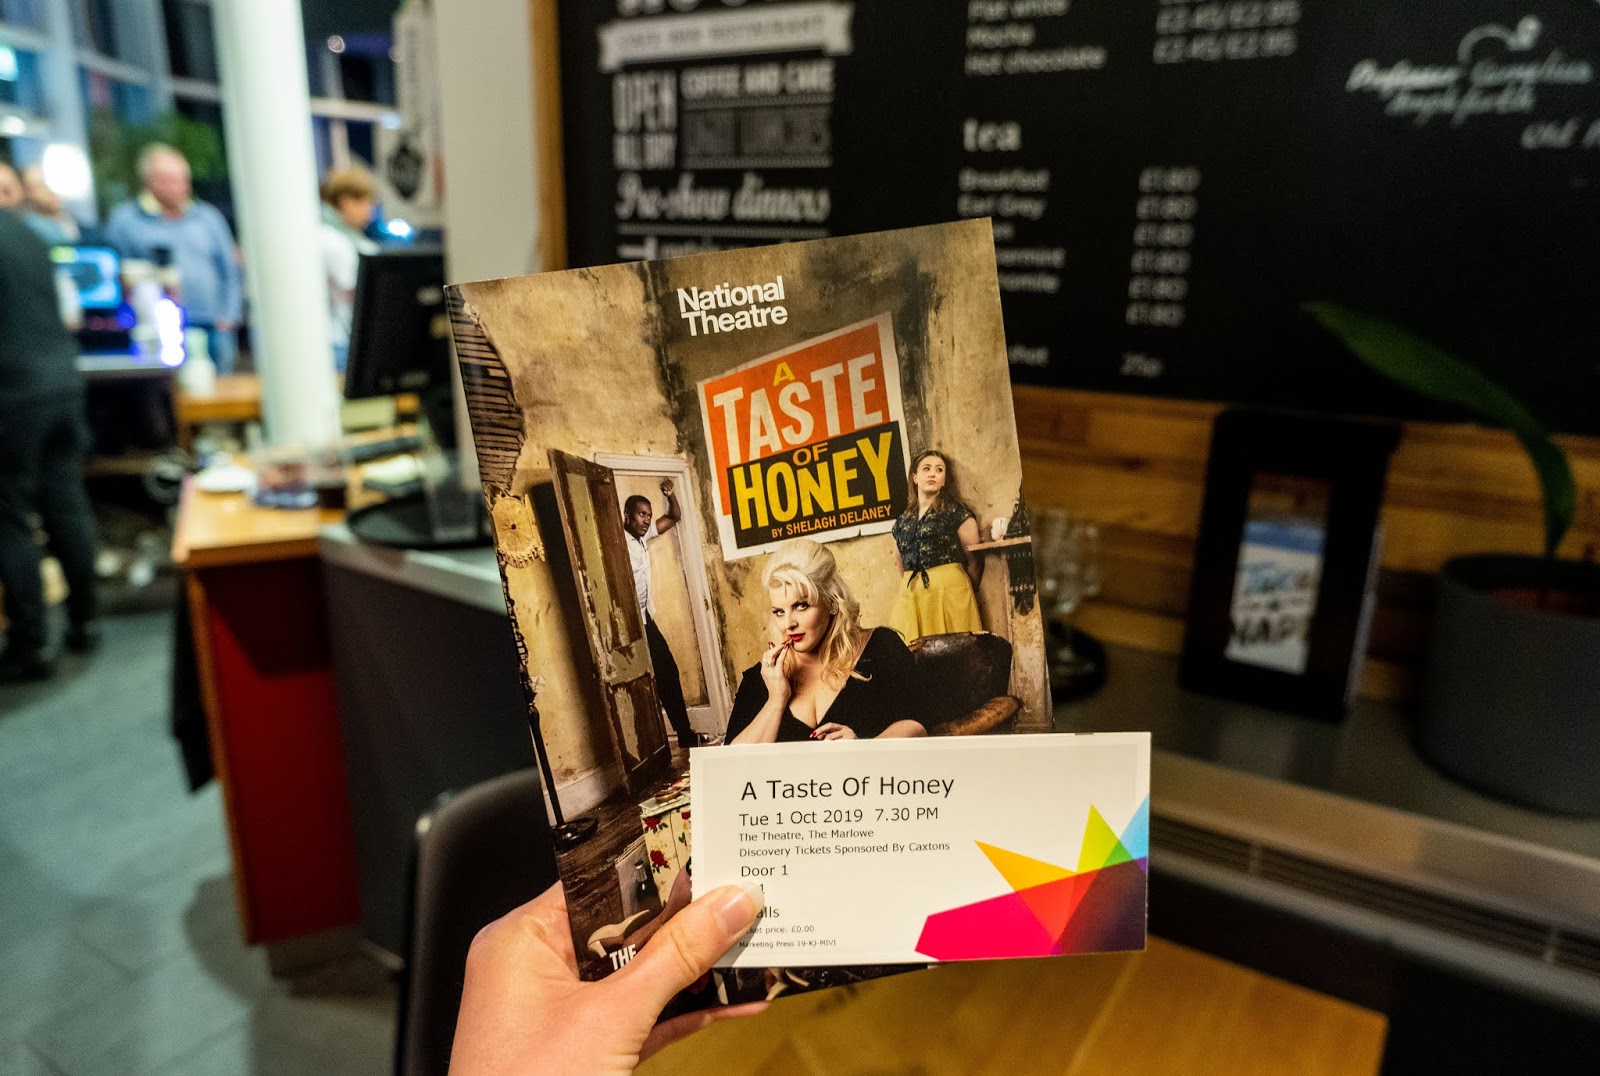 My programme and ticket for the National Theatre's A Taste Of Honey at The Marlowe Theatre in Canterbury, Kent